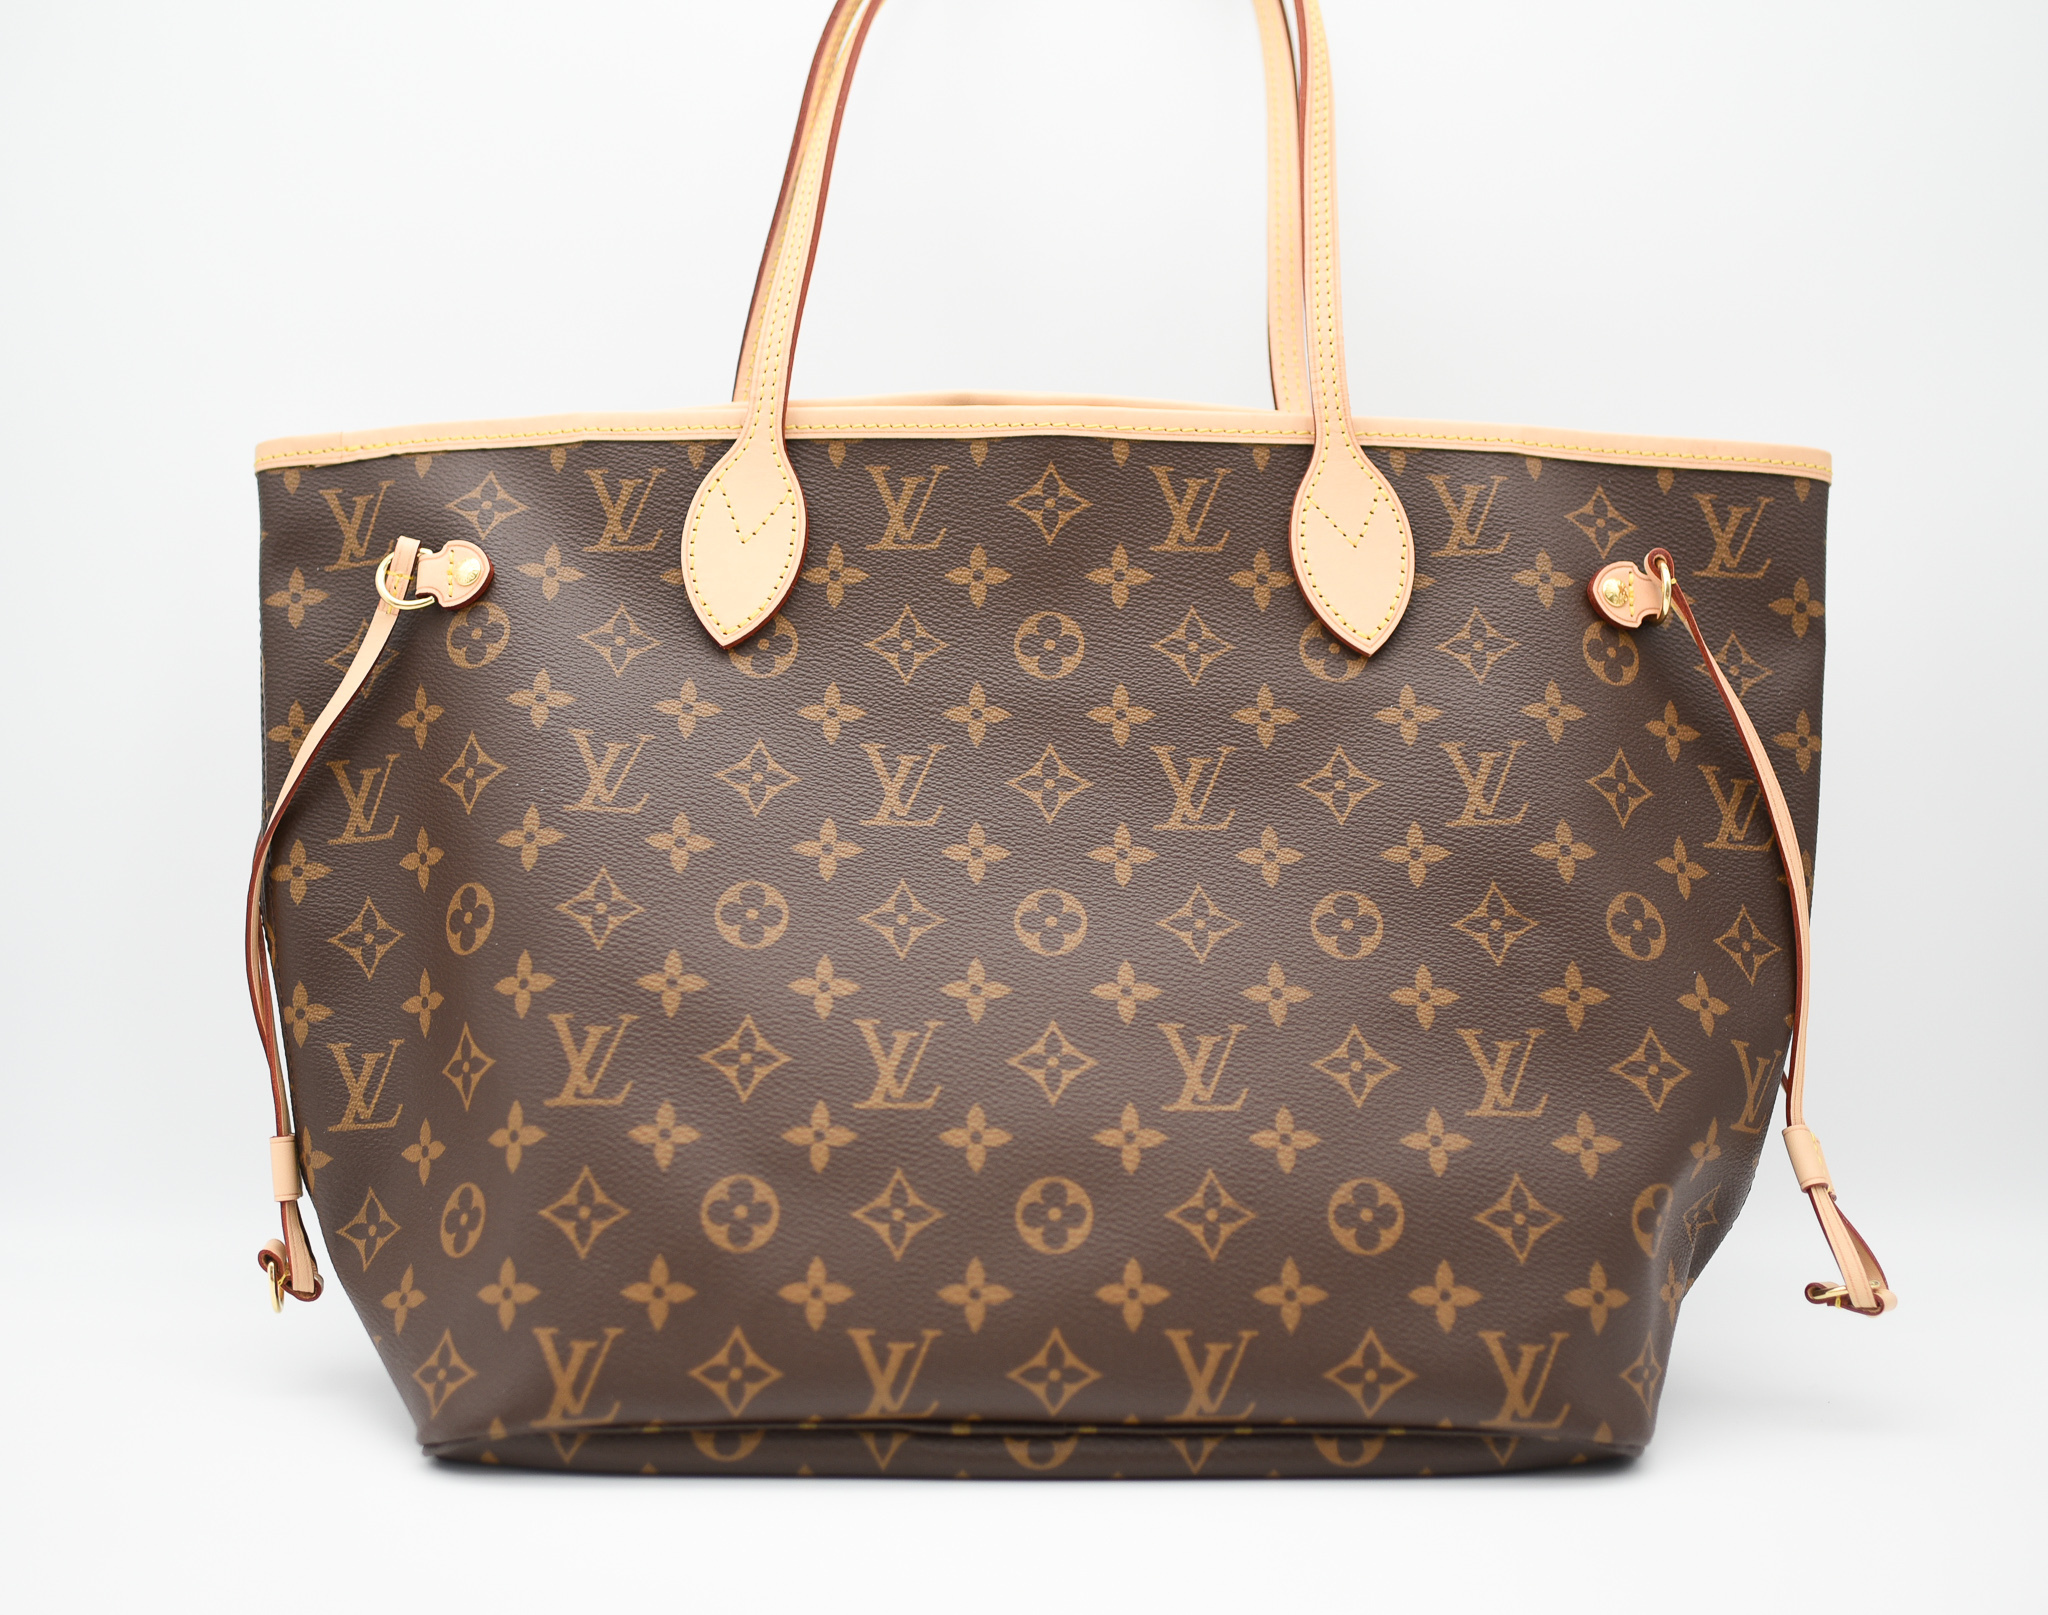 This Louis Vuitton handbag is a microscopic, crumb-size version of